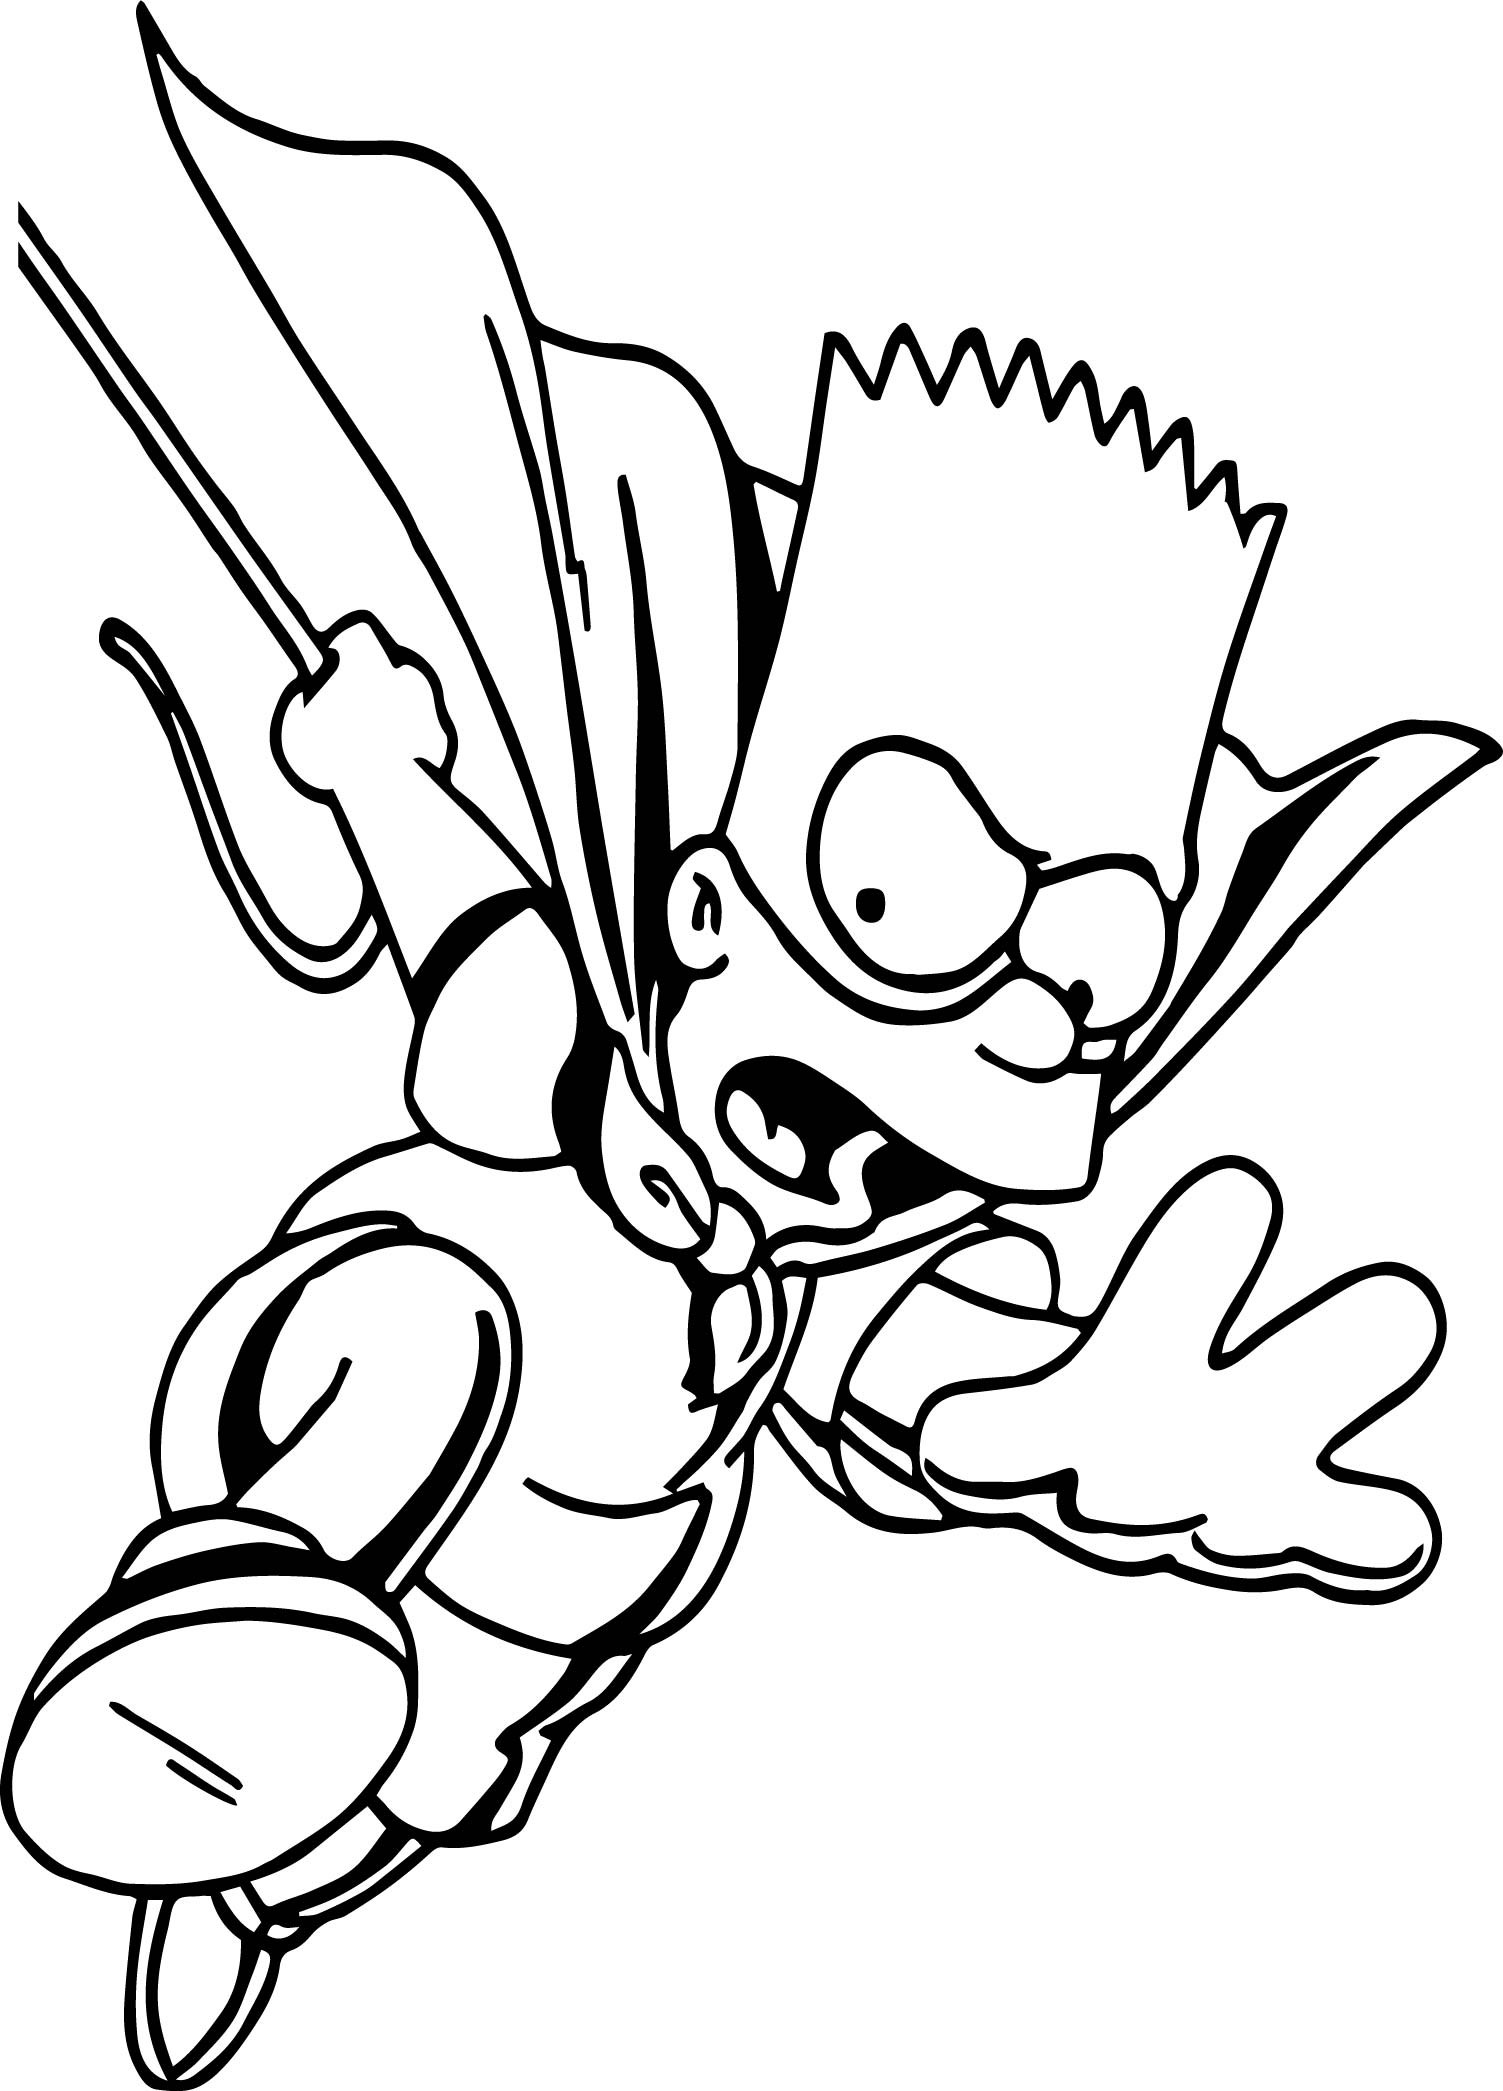 Homer Simpson Coloring Page at GetColorings.com | Free ...